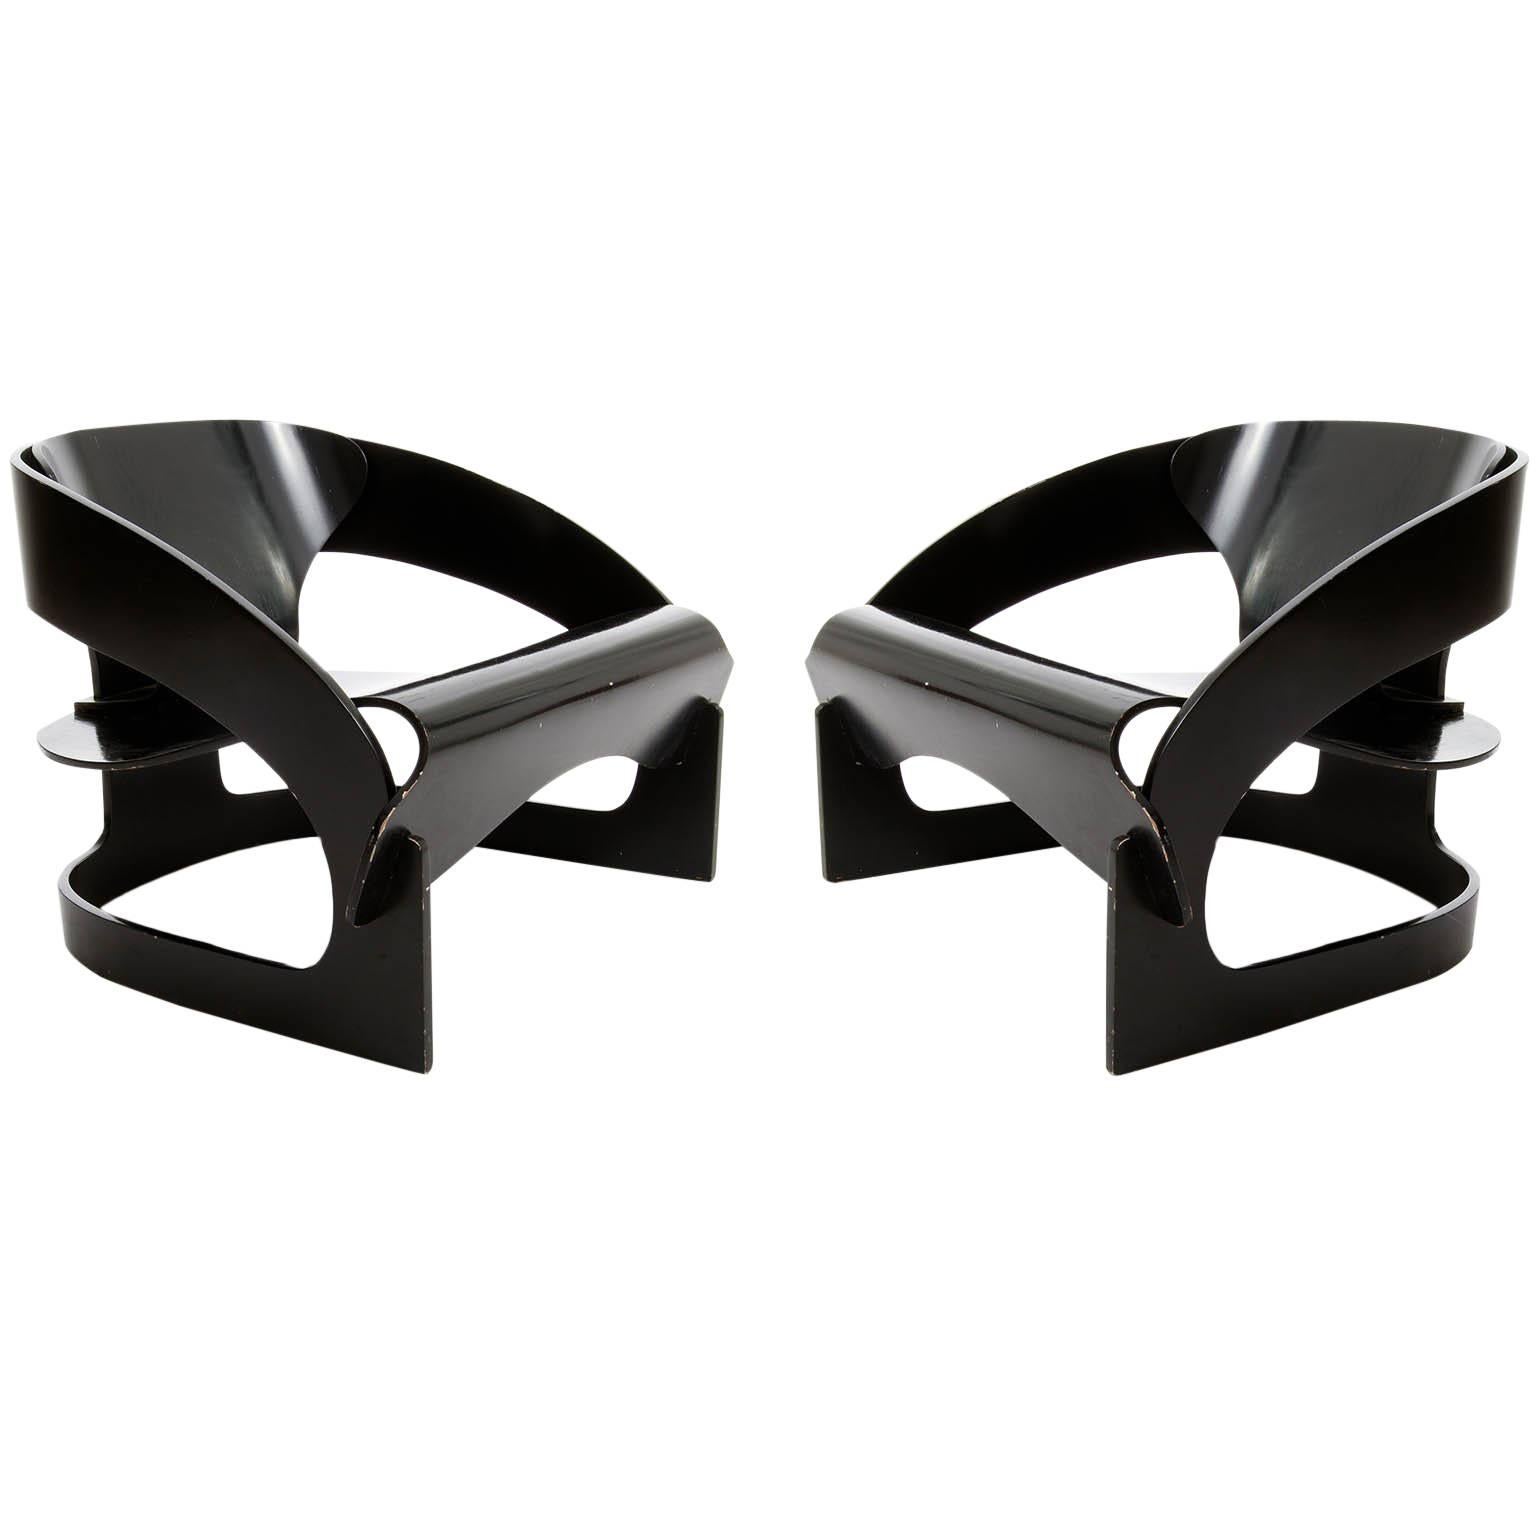 Pair of Joe Colombo Chairs No. 4801, Black Plywood, Kartell, Italy, circa 1963 For Sale